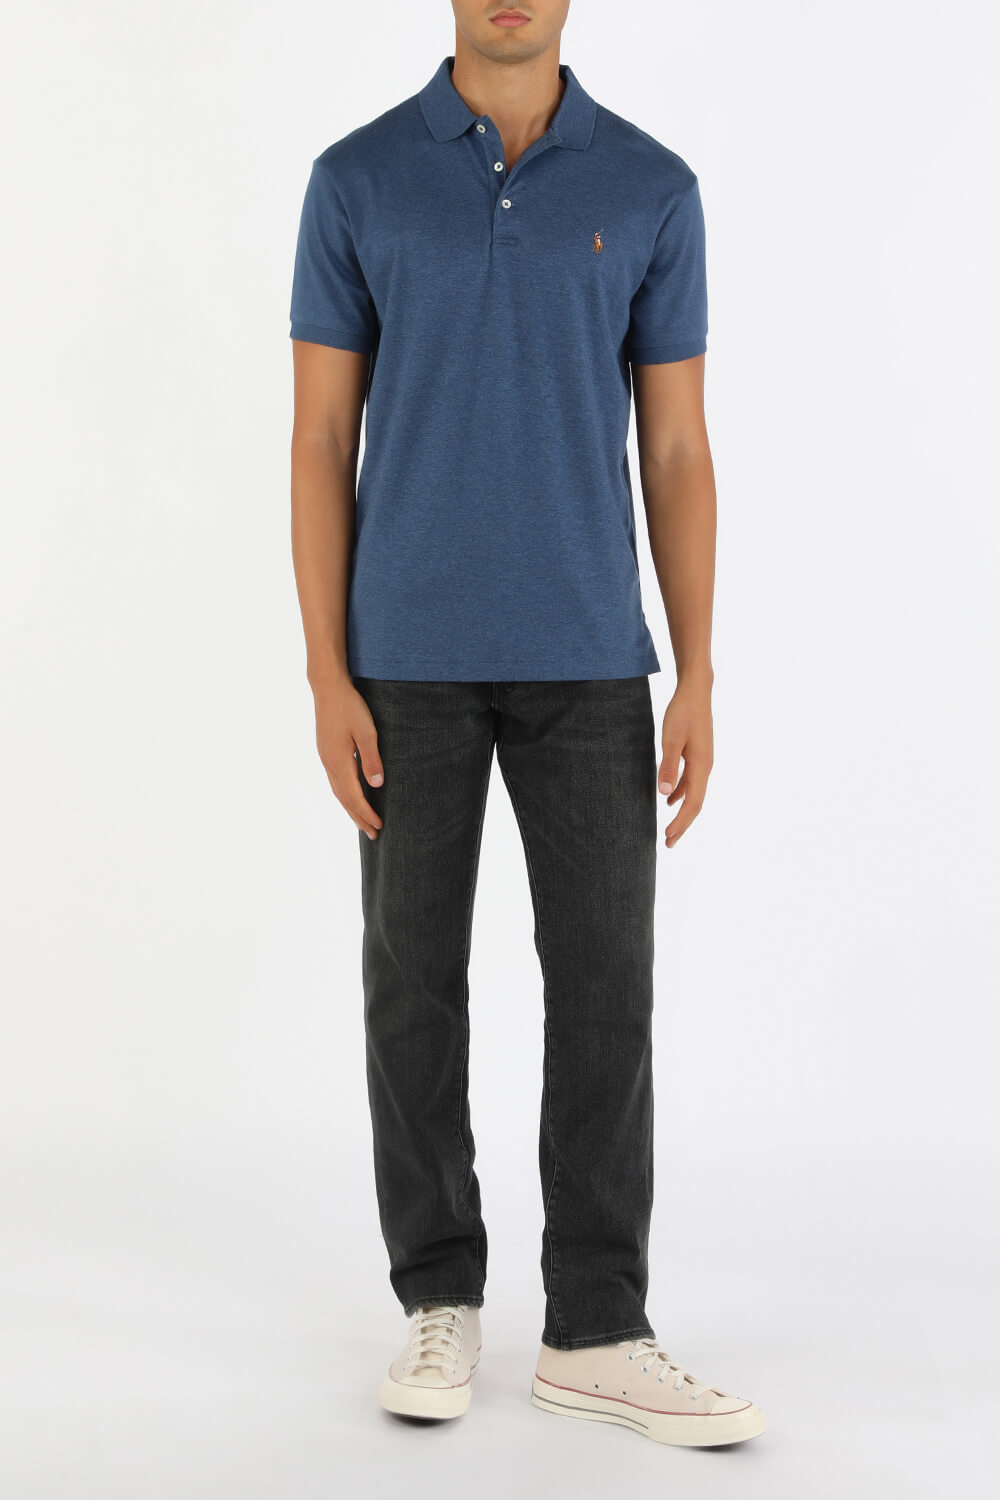 Short Sleeves Knit Polo Shirt in Derby Blue POLO RALPH LAUREN